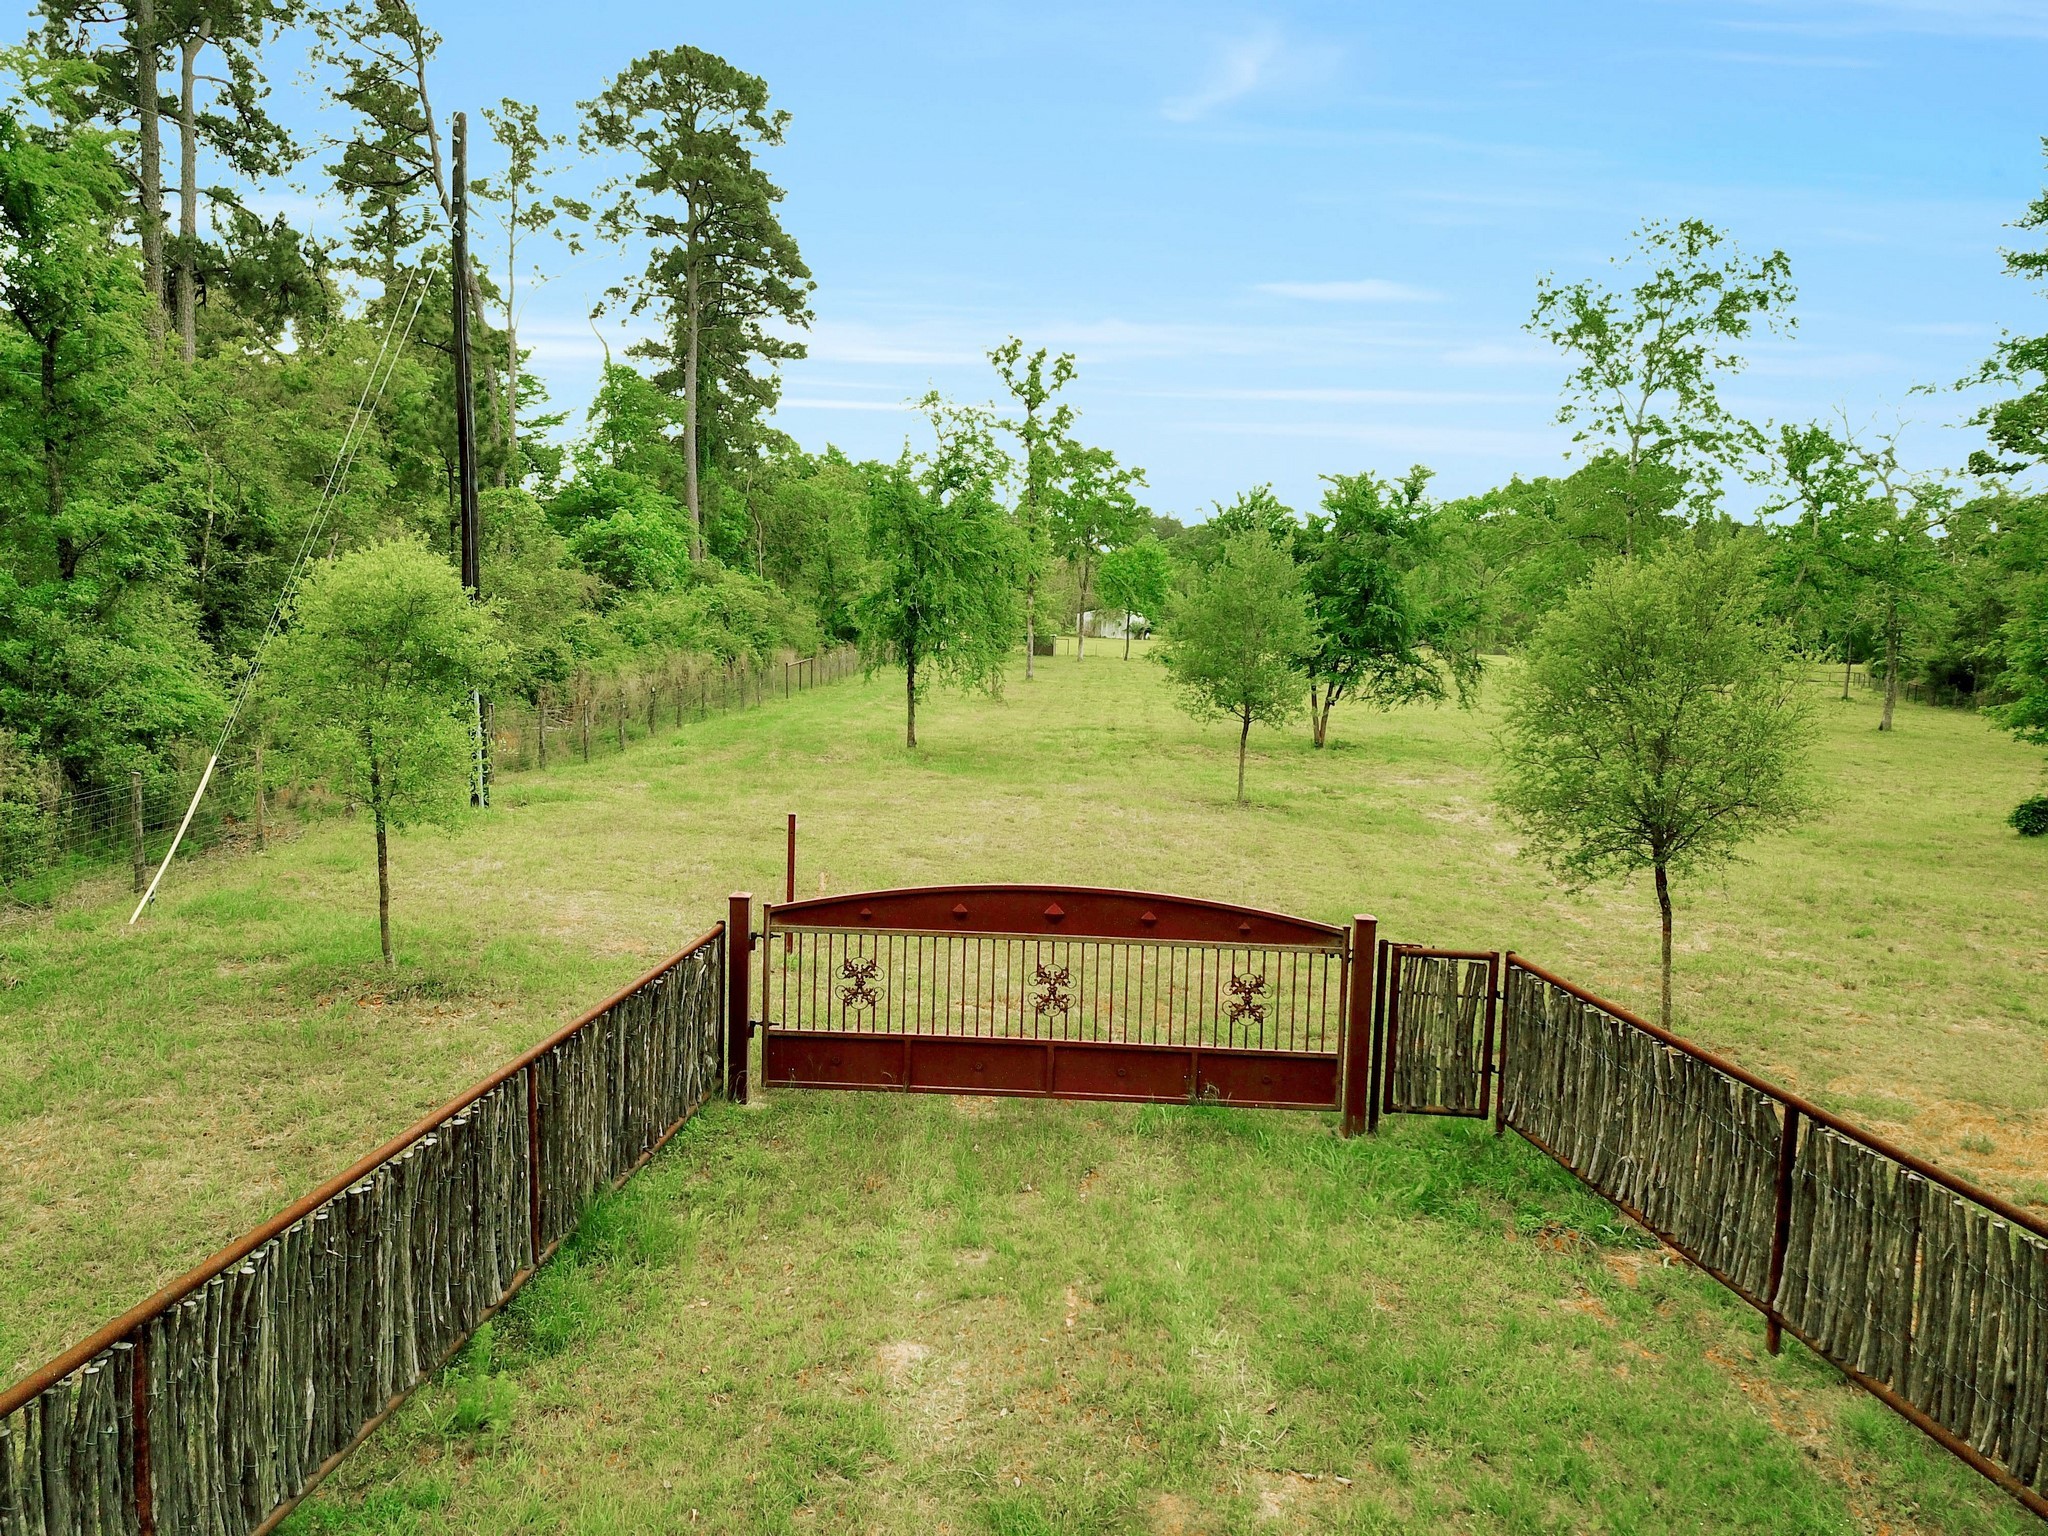 Welcome to your future homesite! The property features maturing trees, electricity, water well, improved pasture, improved driveway (base) and complete fencing.